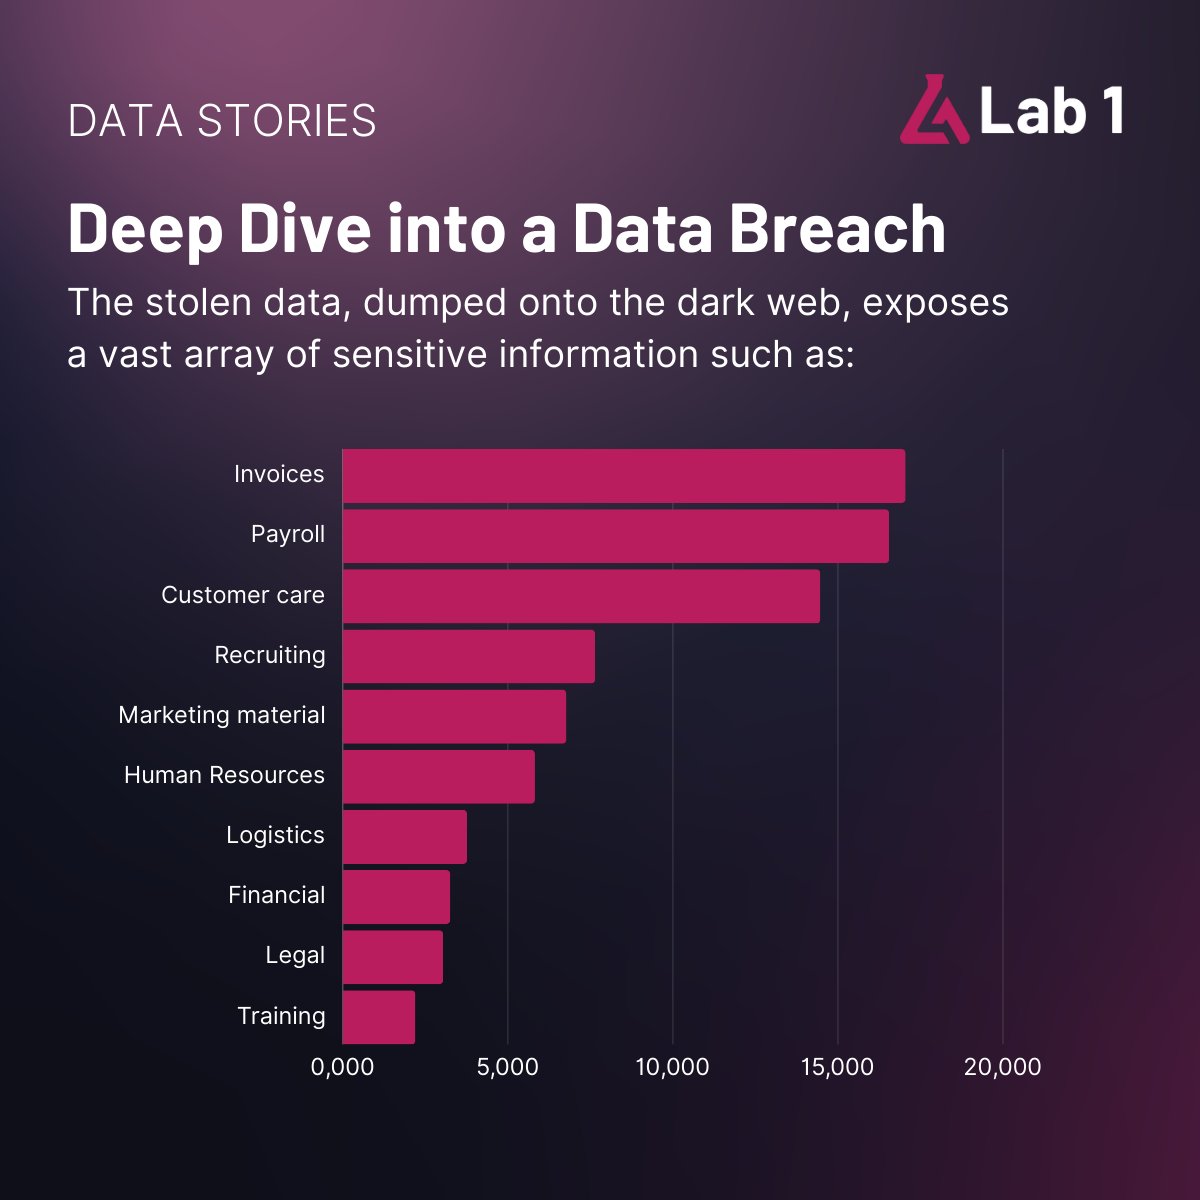 We don't just count breaches - We analyse them, thoroughly. Our DataStories series will cover new data breaches, have a deep dive into significant breaches. Follow to be the first to know.
#datastories #CyberSecurityAwareness #data